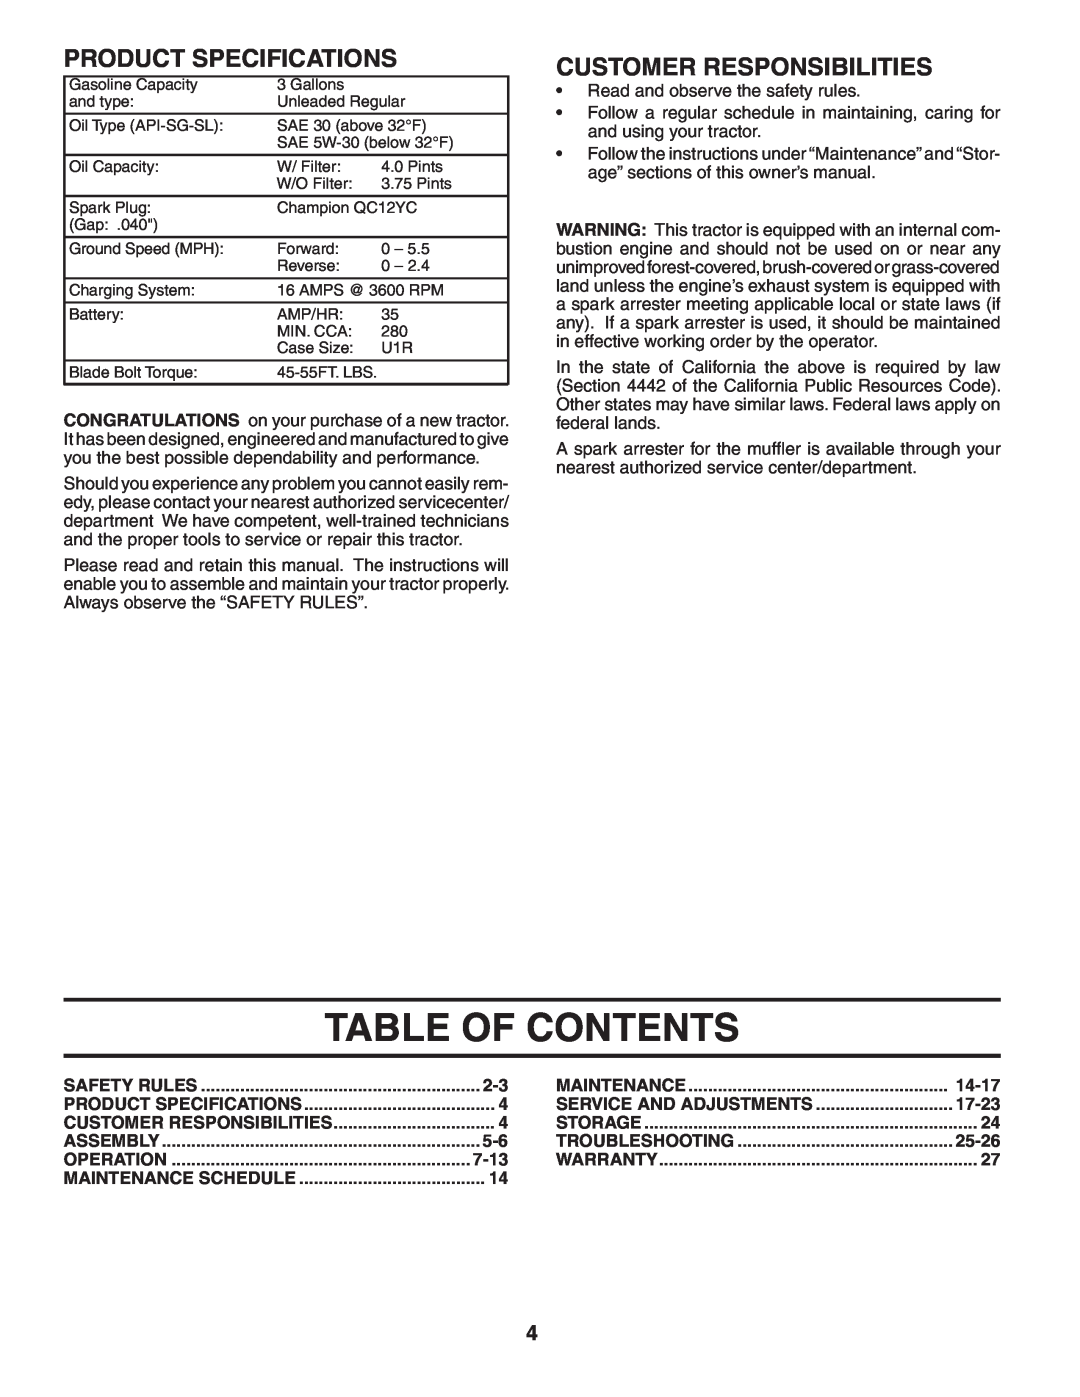 Poulan 404489 manual Table Of Contents, Product Specifications, Customer Responsibilities, 7-13, 14-17, 17-23, 25-26 